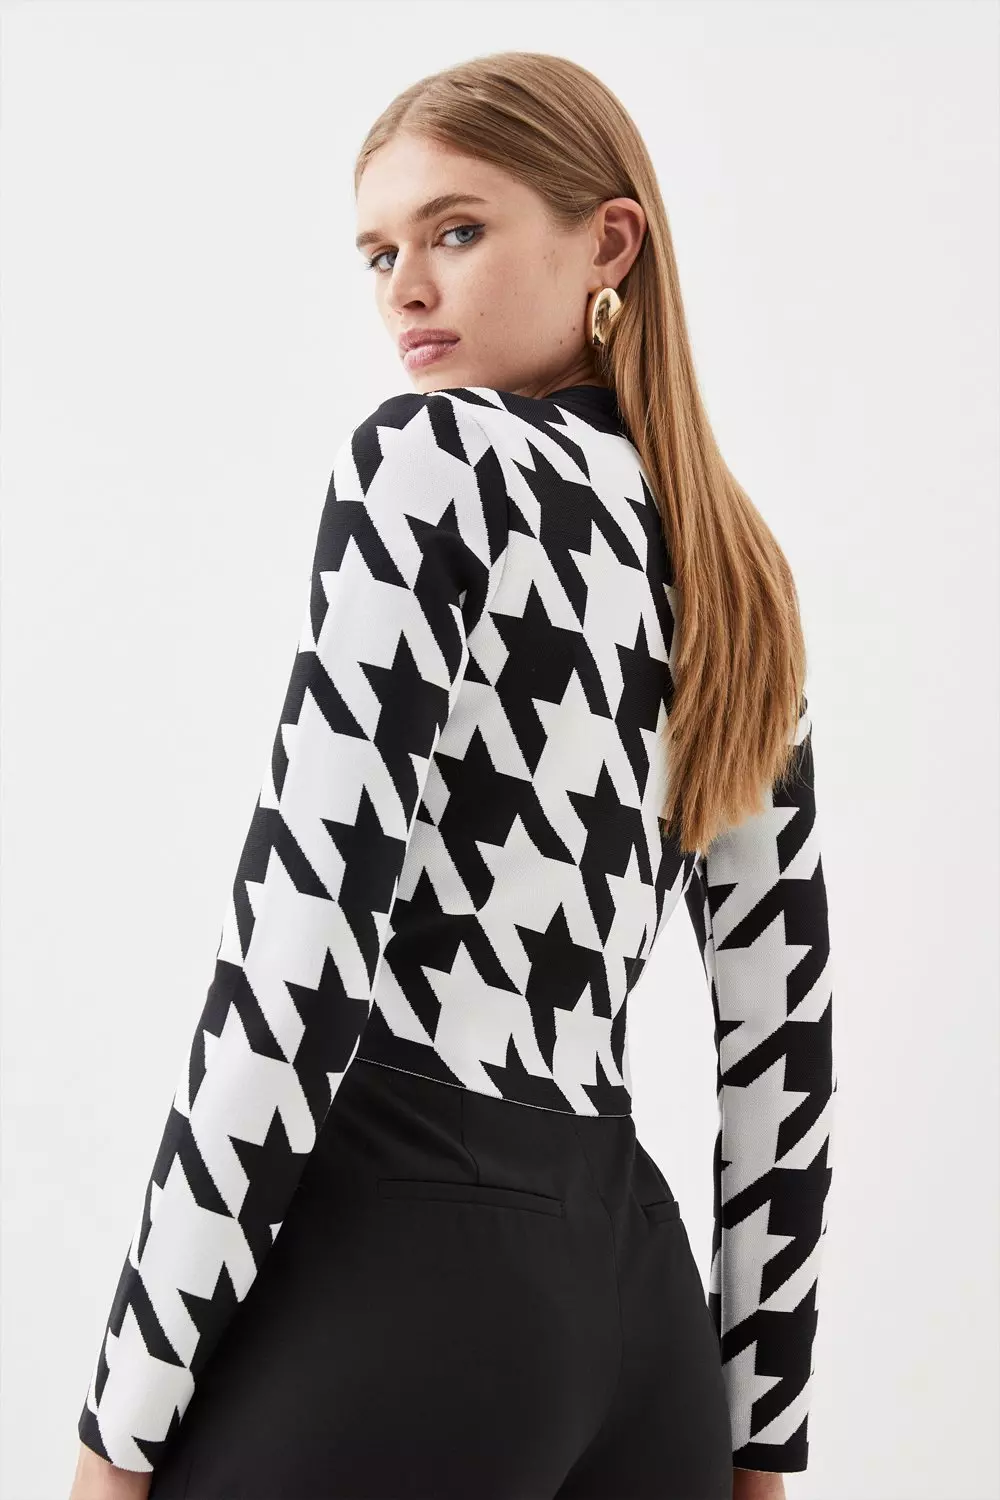 COLLUSION cropped bralette co-ord in houndstooth print